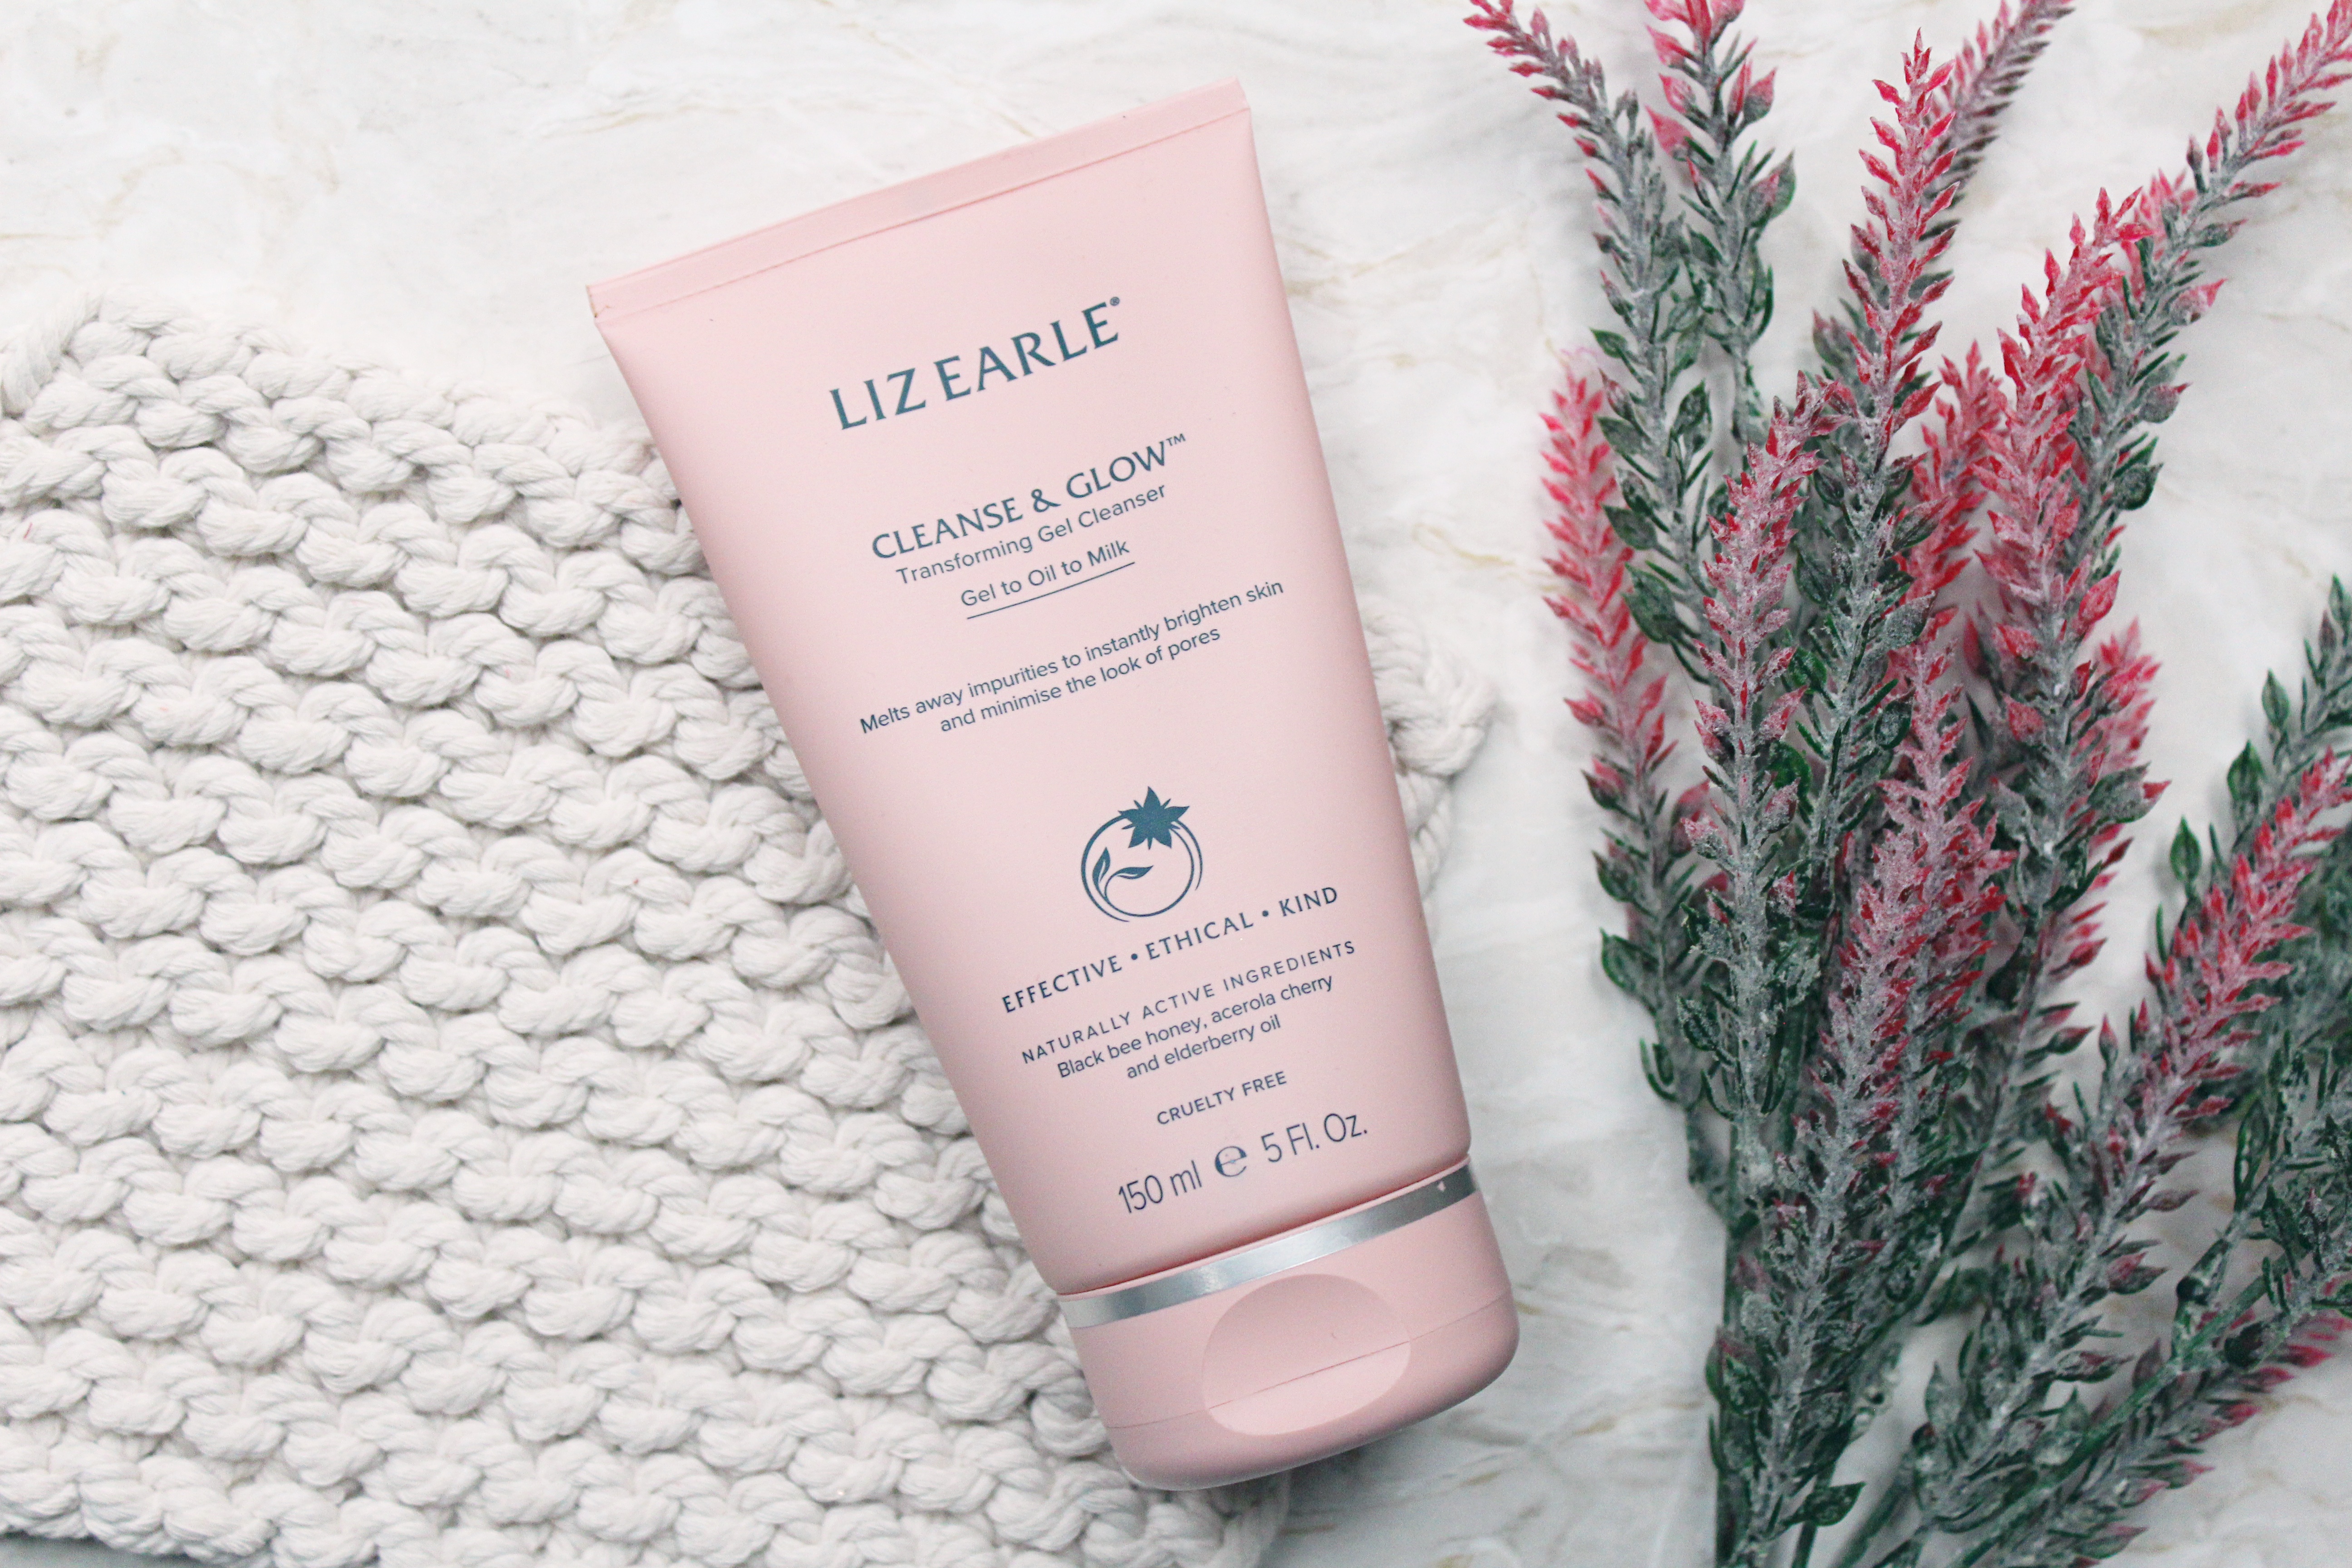 Liz Earle Cleanse & Glow Transforming Cleanser Review